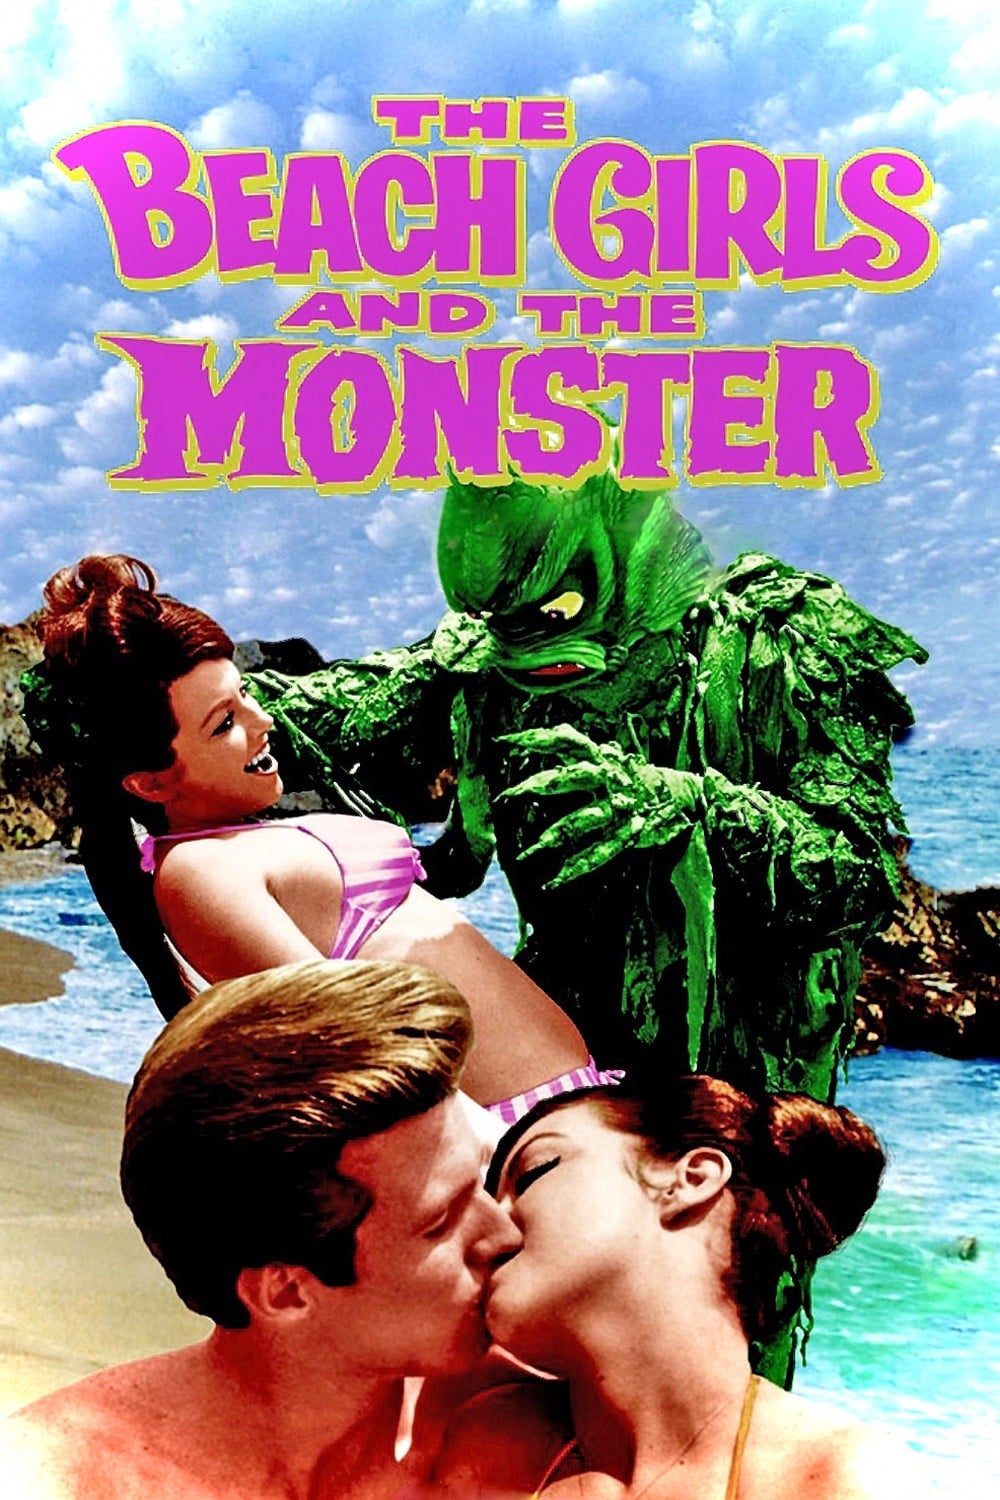 The Beach Girls and the Monster (1965)